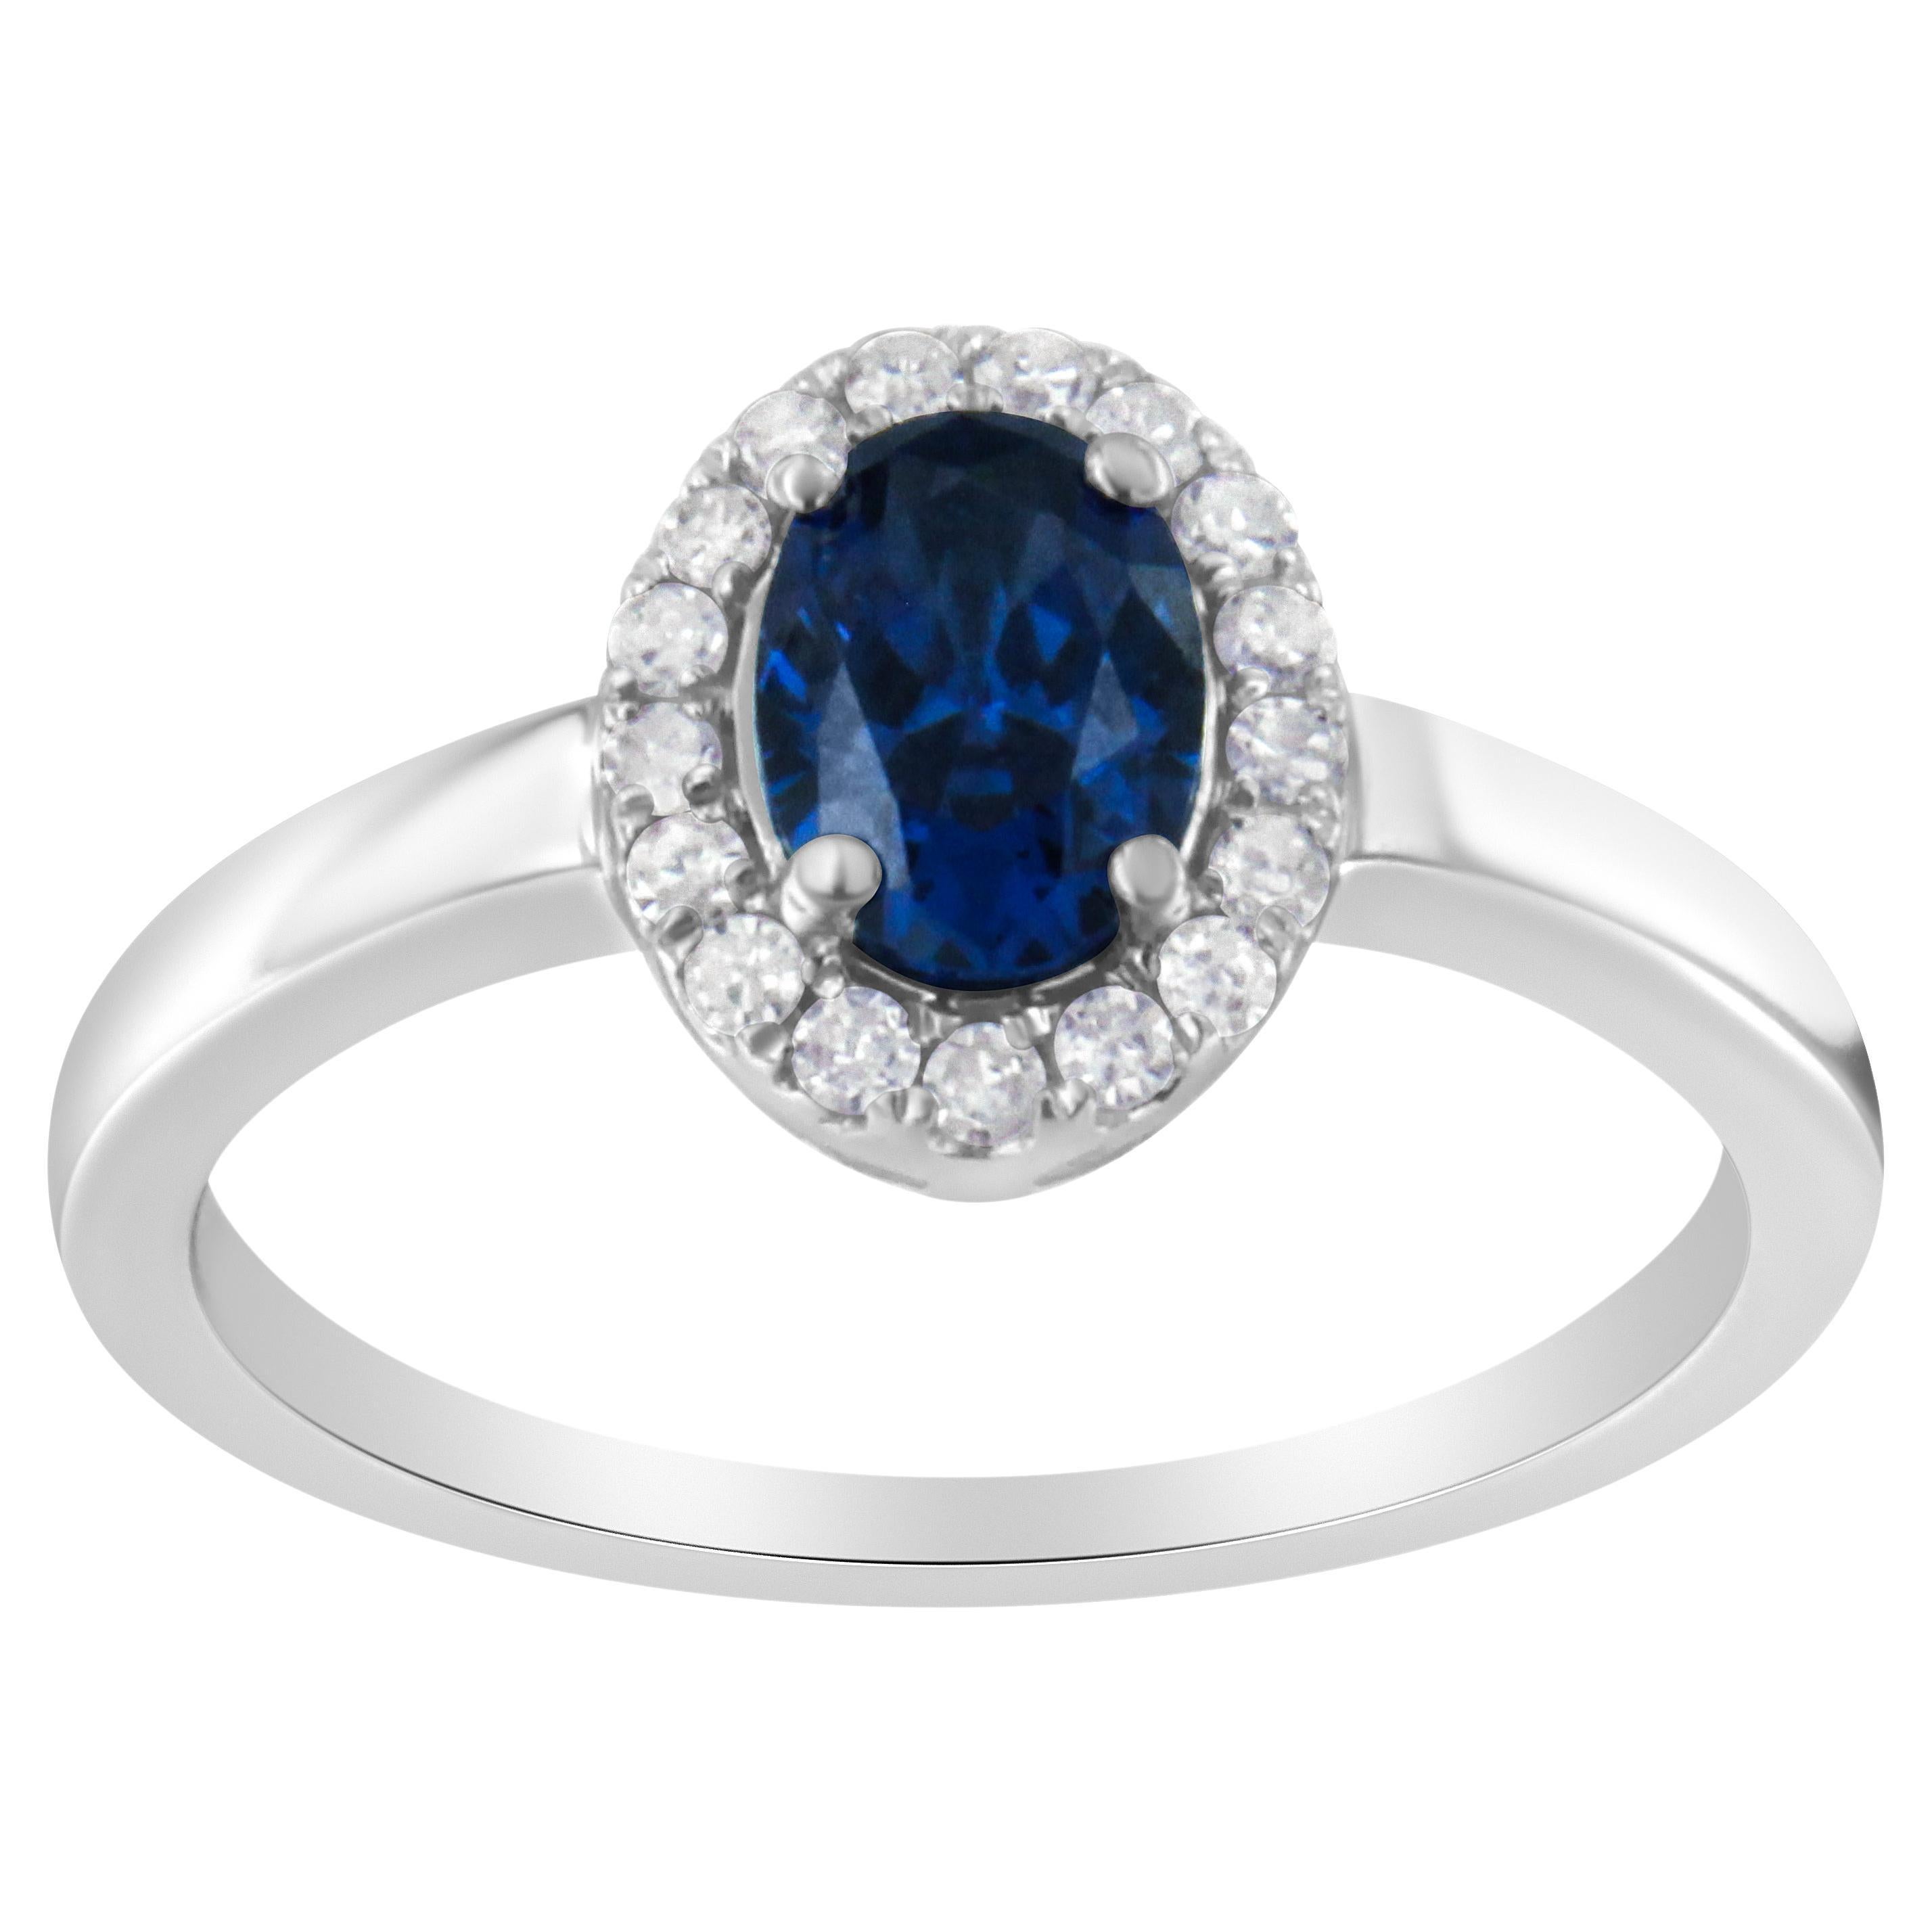 10K White Gold 1/5 Carat Round Diamond & Blue Sapphire Halo Cocktail Ring For Sale